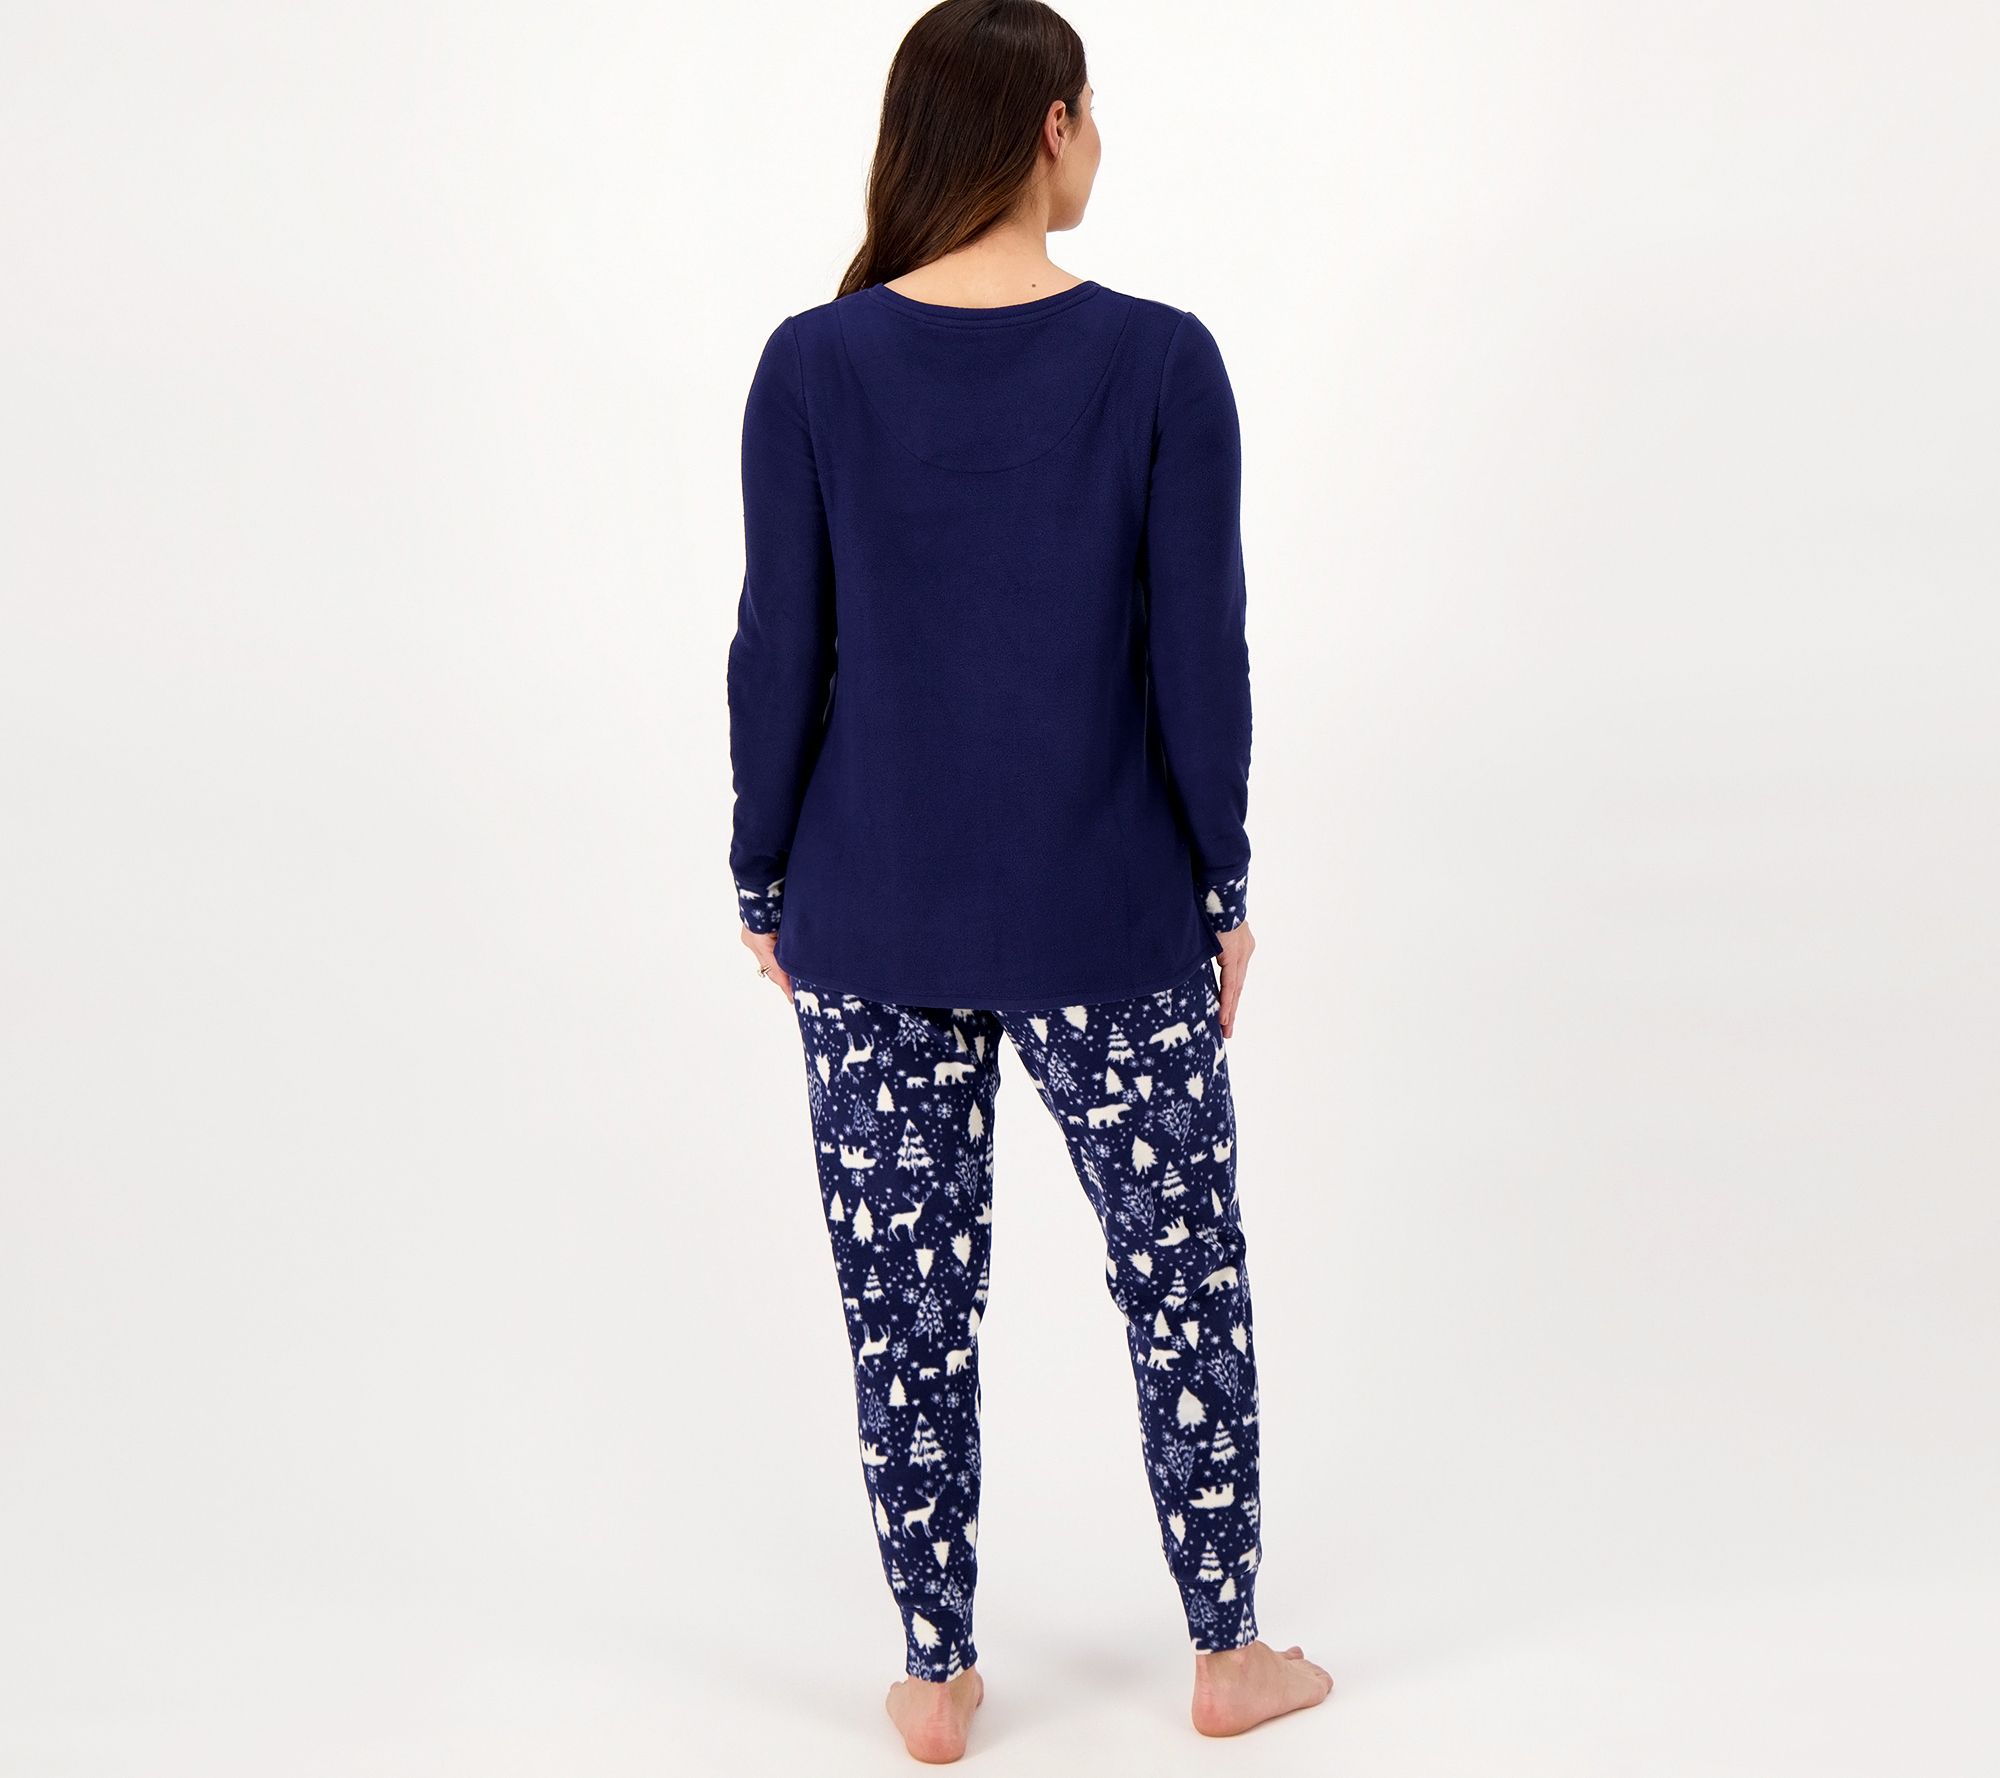 Cuddl Duds Grey Wolf Pajama Pants for Women